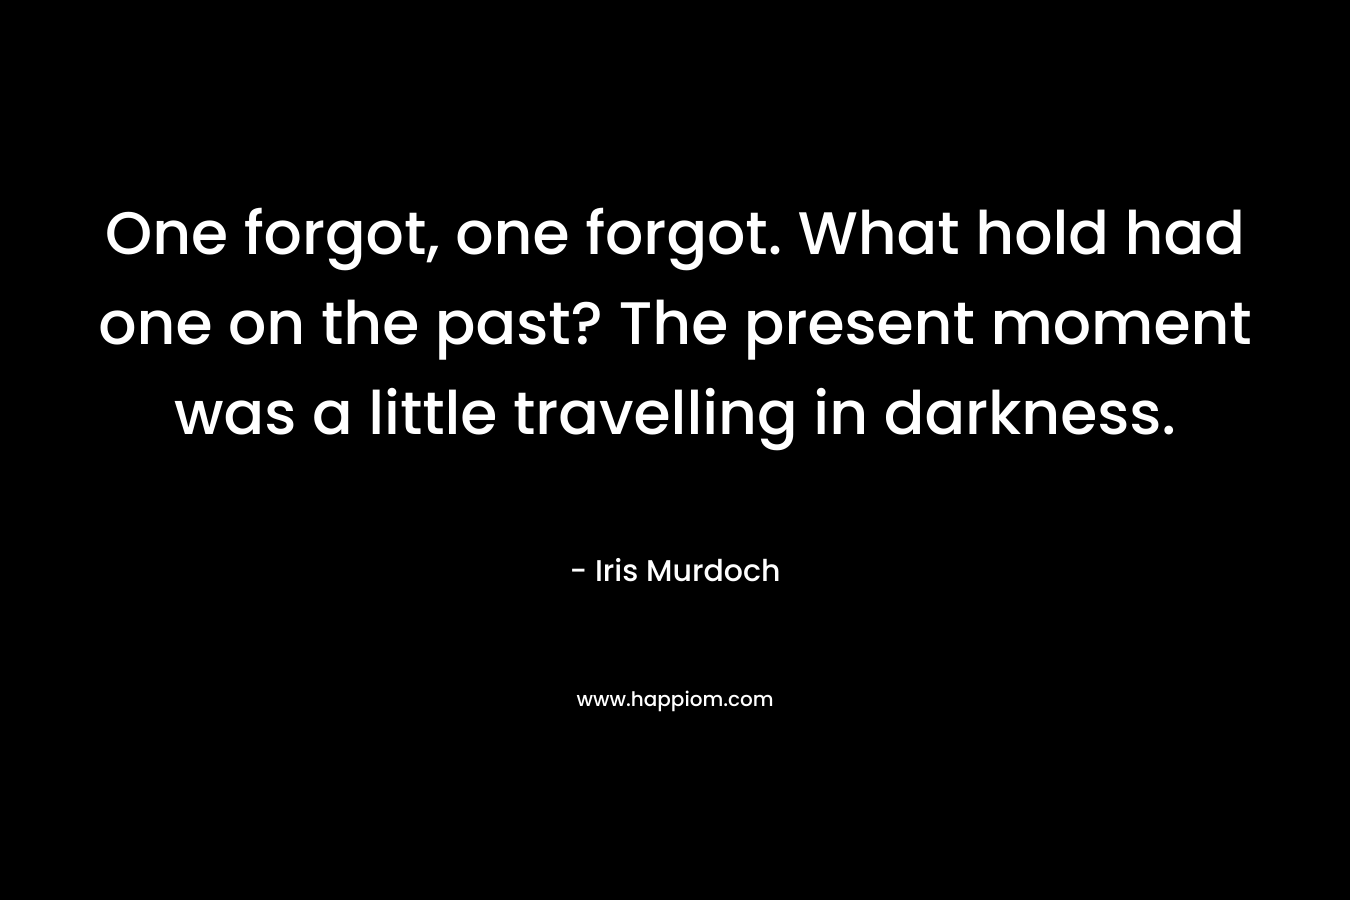 One forgot, one forgot. What hold had one on the past? The present moment was a little travelling in darkness.